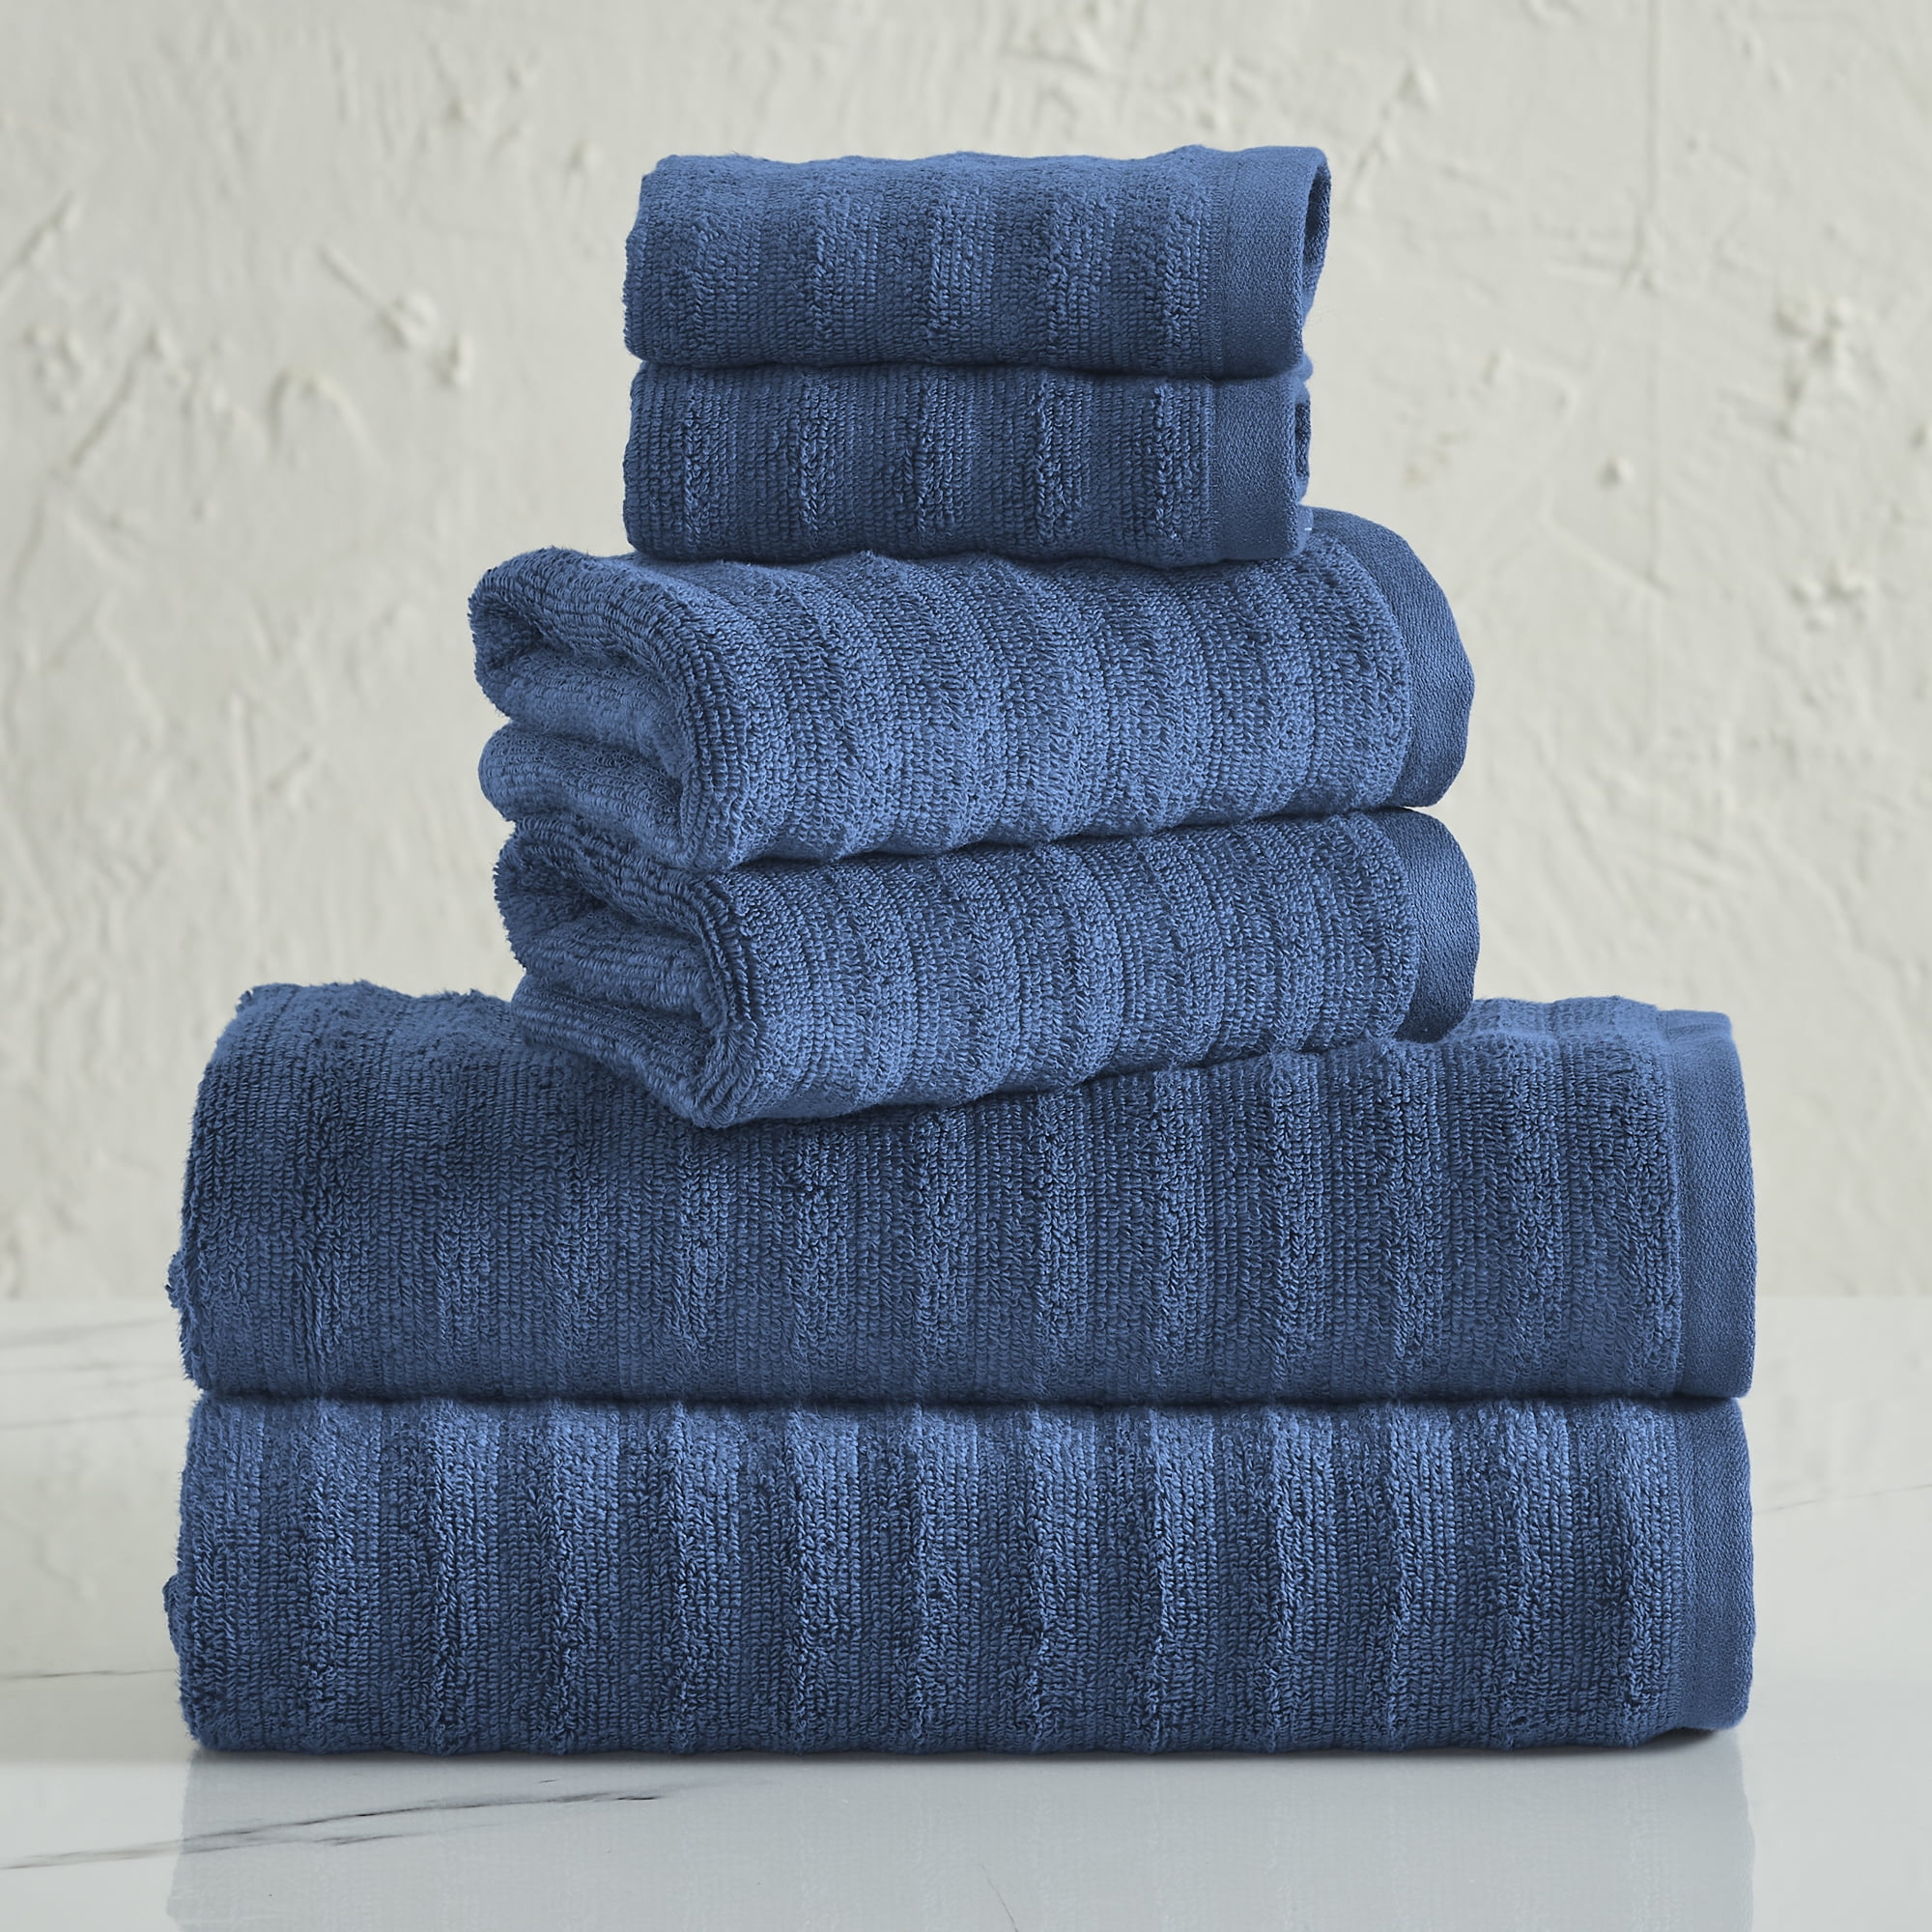 Noble Excellence Performance Quick Dry Bath Towels